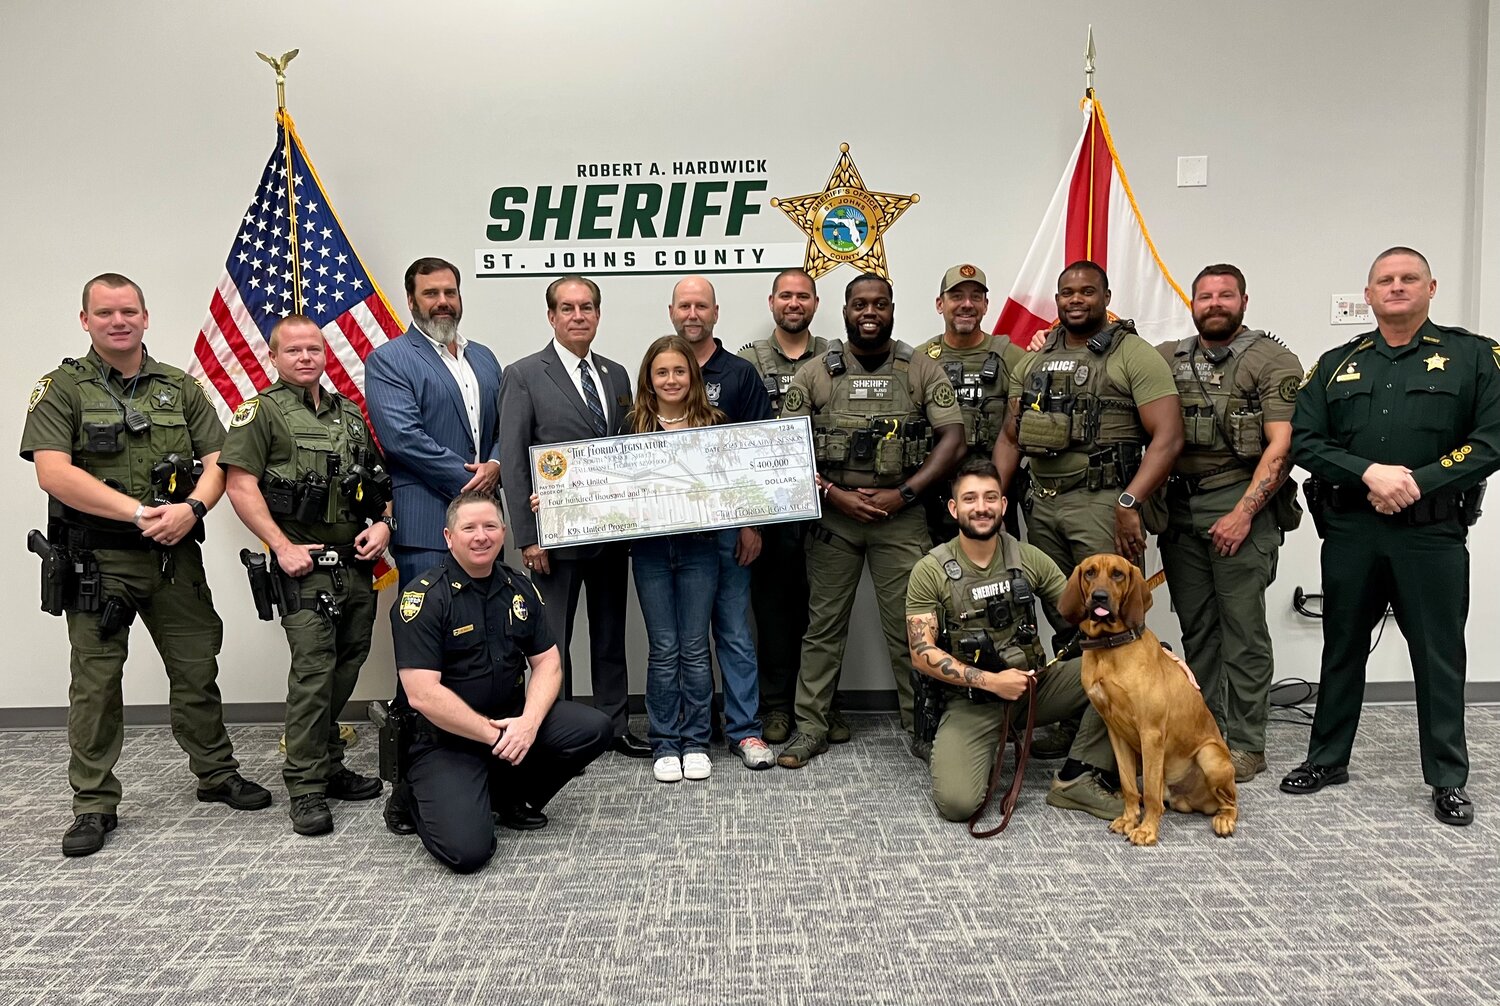 Sen. Tom Wright presents K9s United board members with a $400,000 state grant, along with St. Johns County Sheriff Robert Hardwick and deputies, and representatives of the Nassau County Sheriff's Office.